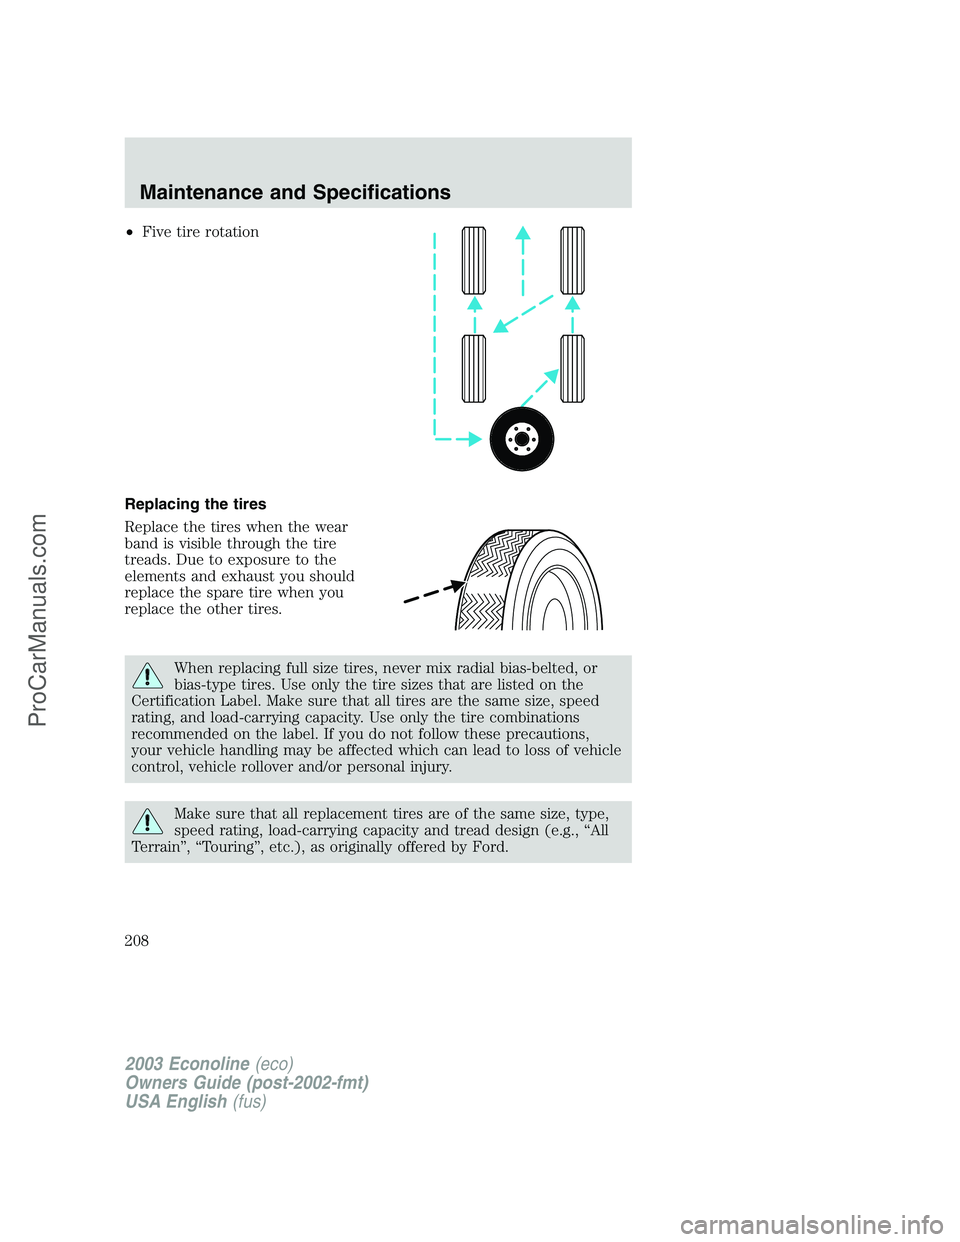 FORD E-350 2003  Owners Manual •Five tire rotation
Replacing the tires
Replace the tires when the wear
band is visible through the tire
treads. Due to exposure to the
elements and exhaust you should
replace the spare tire when yo